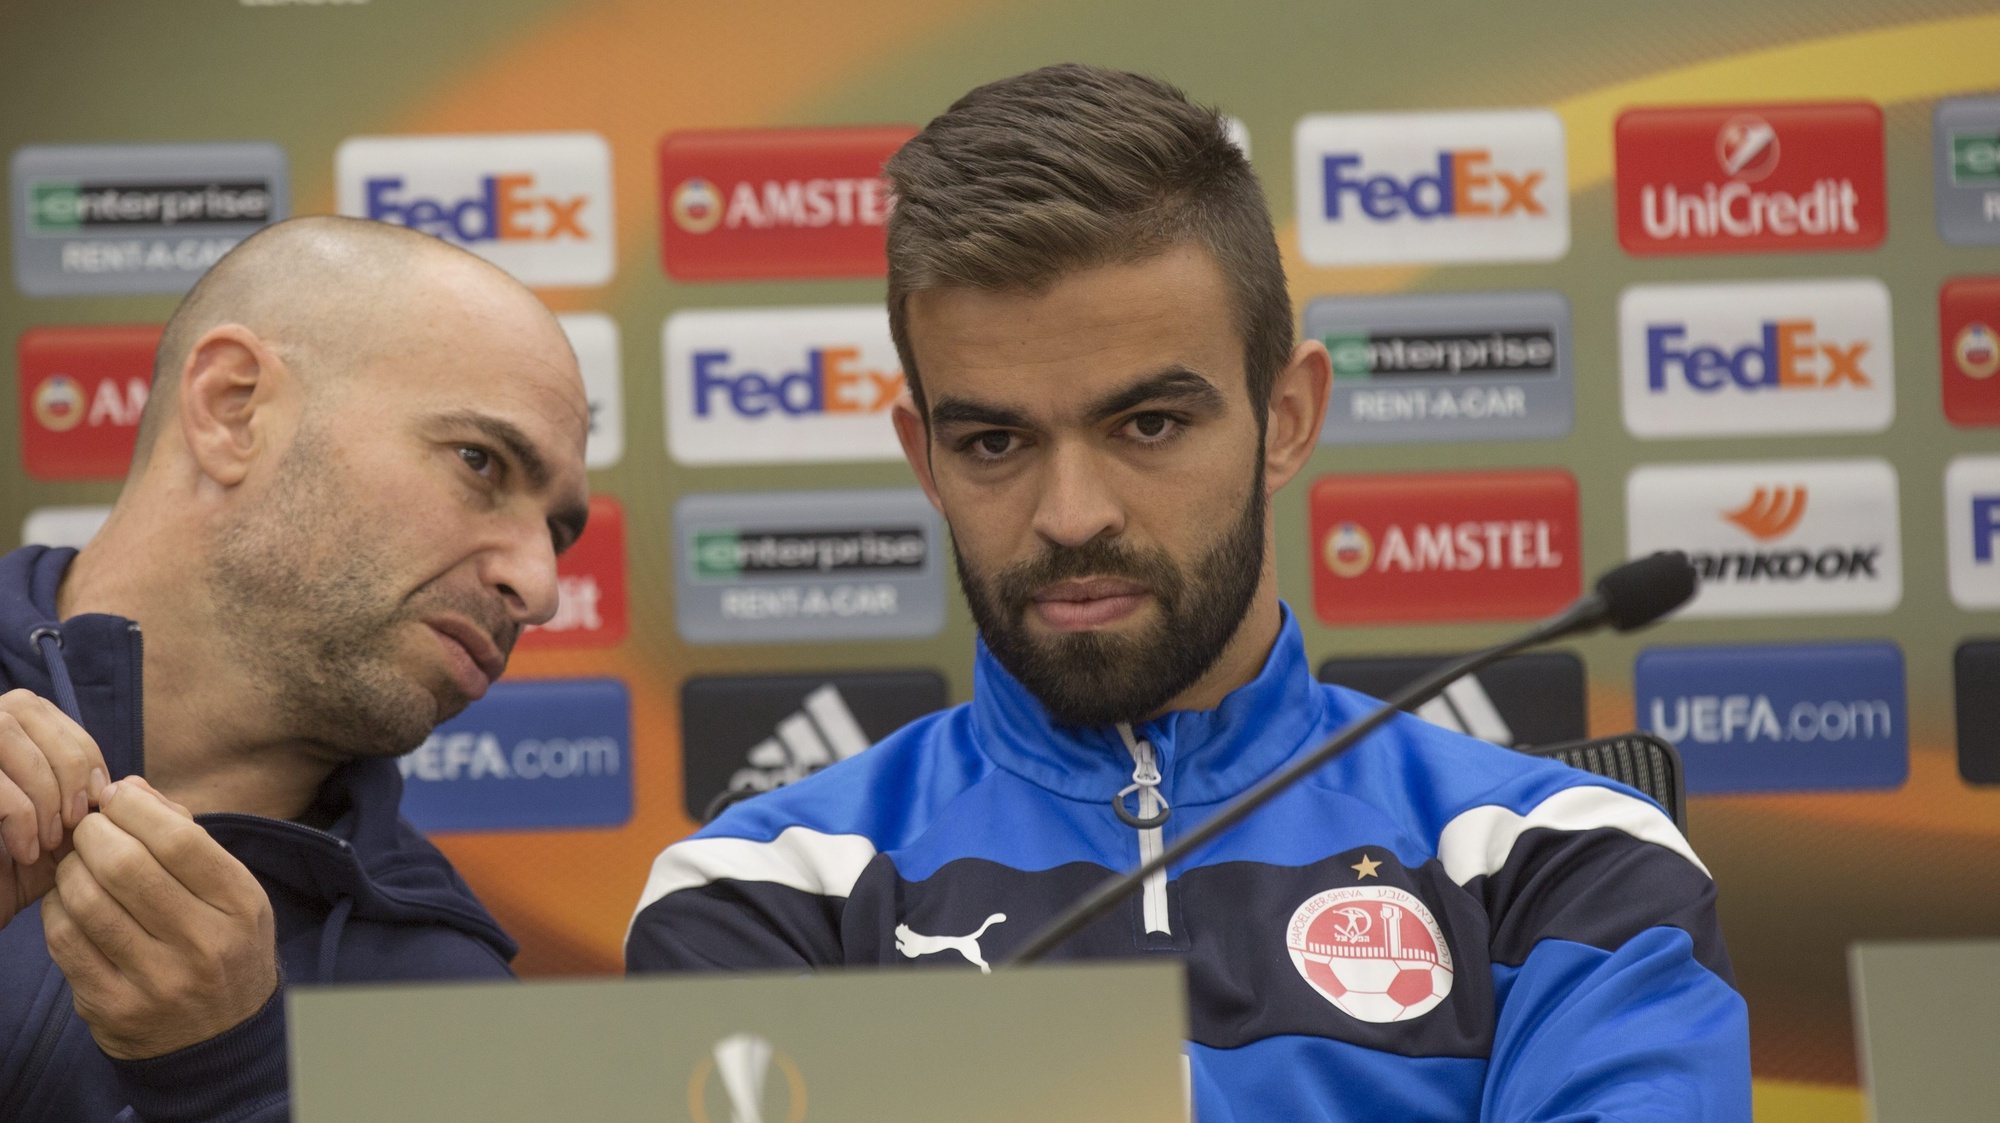 epa05643976 Miguel Vitor, player of Hapoel Beer Sheva, during a Press conference at Tirner stadium in Beer Sheva, Israel, 23 November 2016, ahead of their UEFA Europa League match against Inter Milan.  EPA/ATEF SAFADI